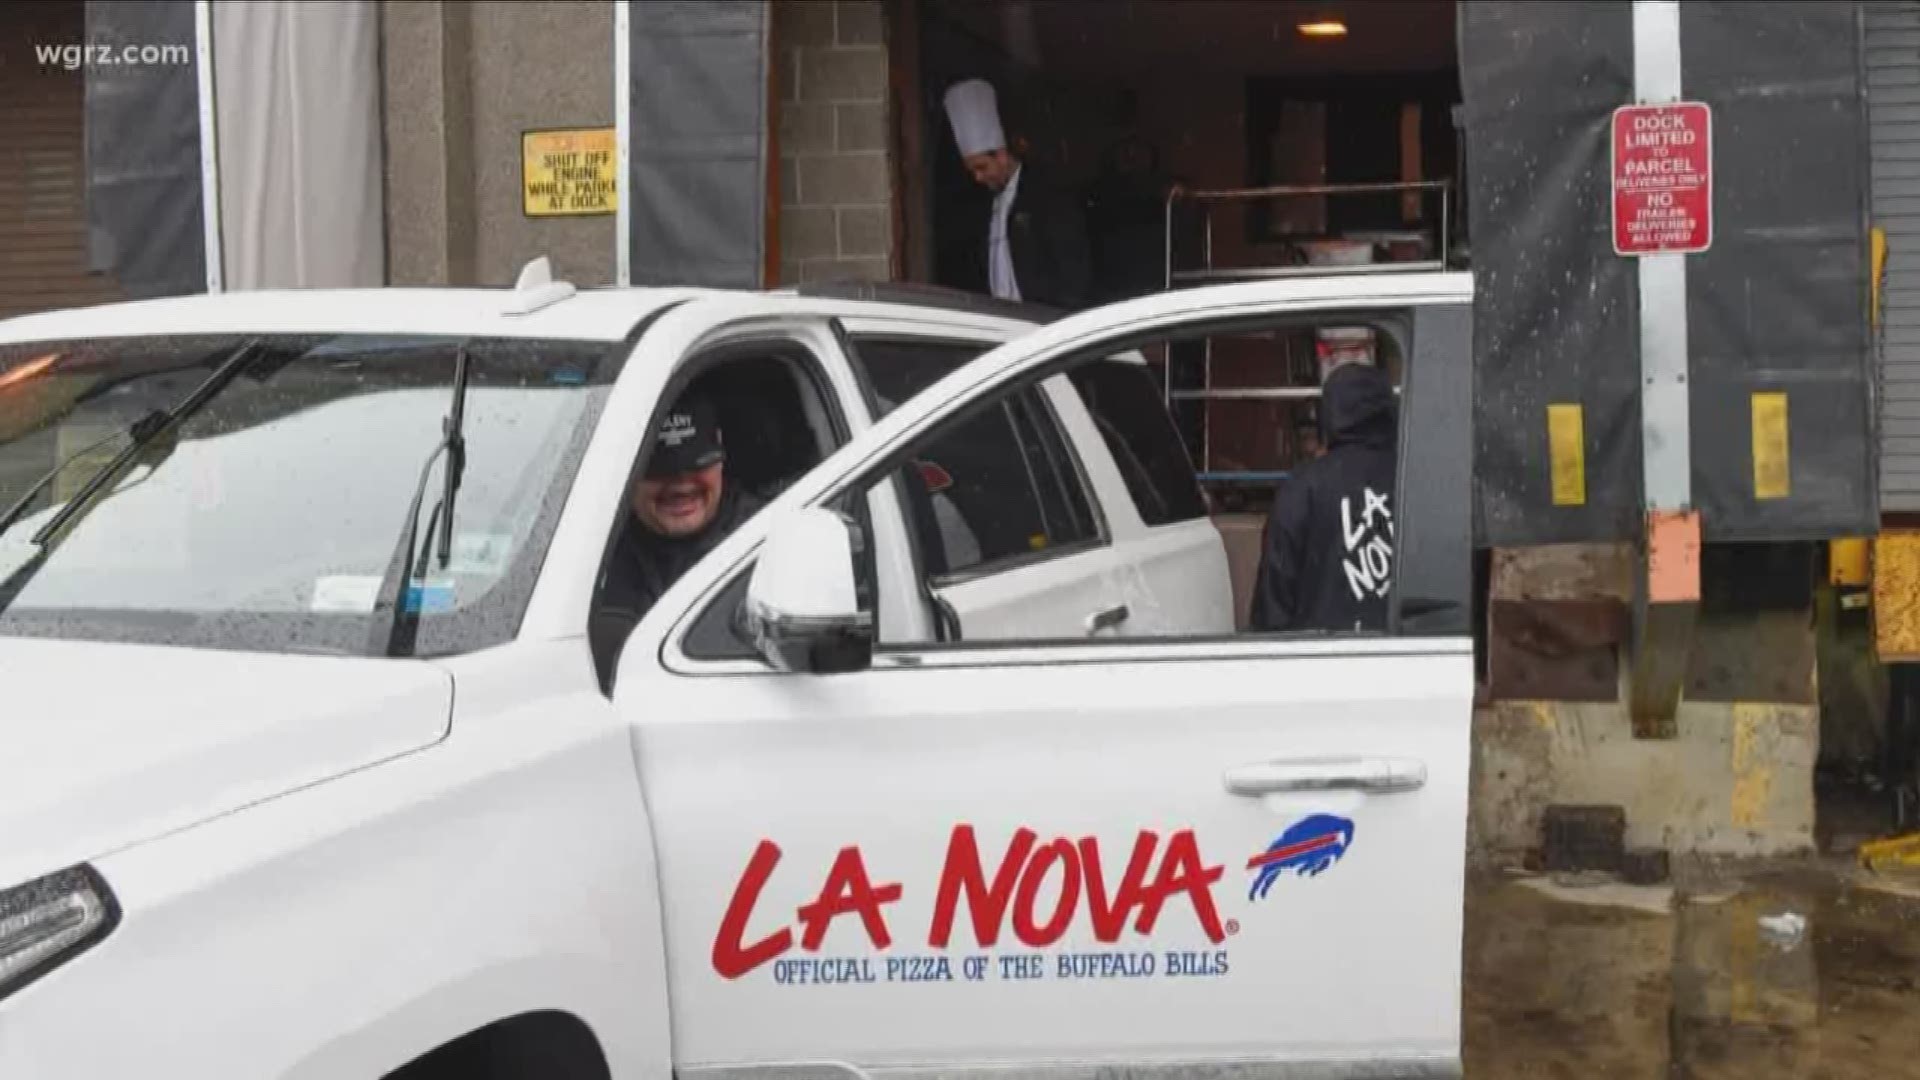 The hospital says La Nova donated enough pizza to feed every single caregiver on every shift yesterday and they thanked the pizzeria for that generosity.